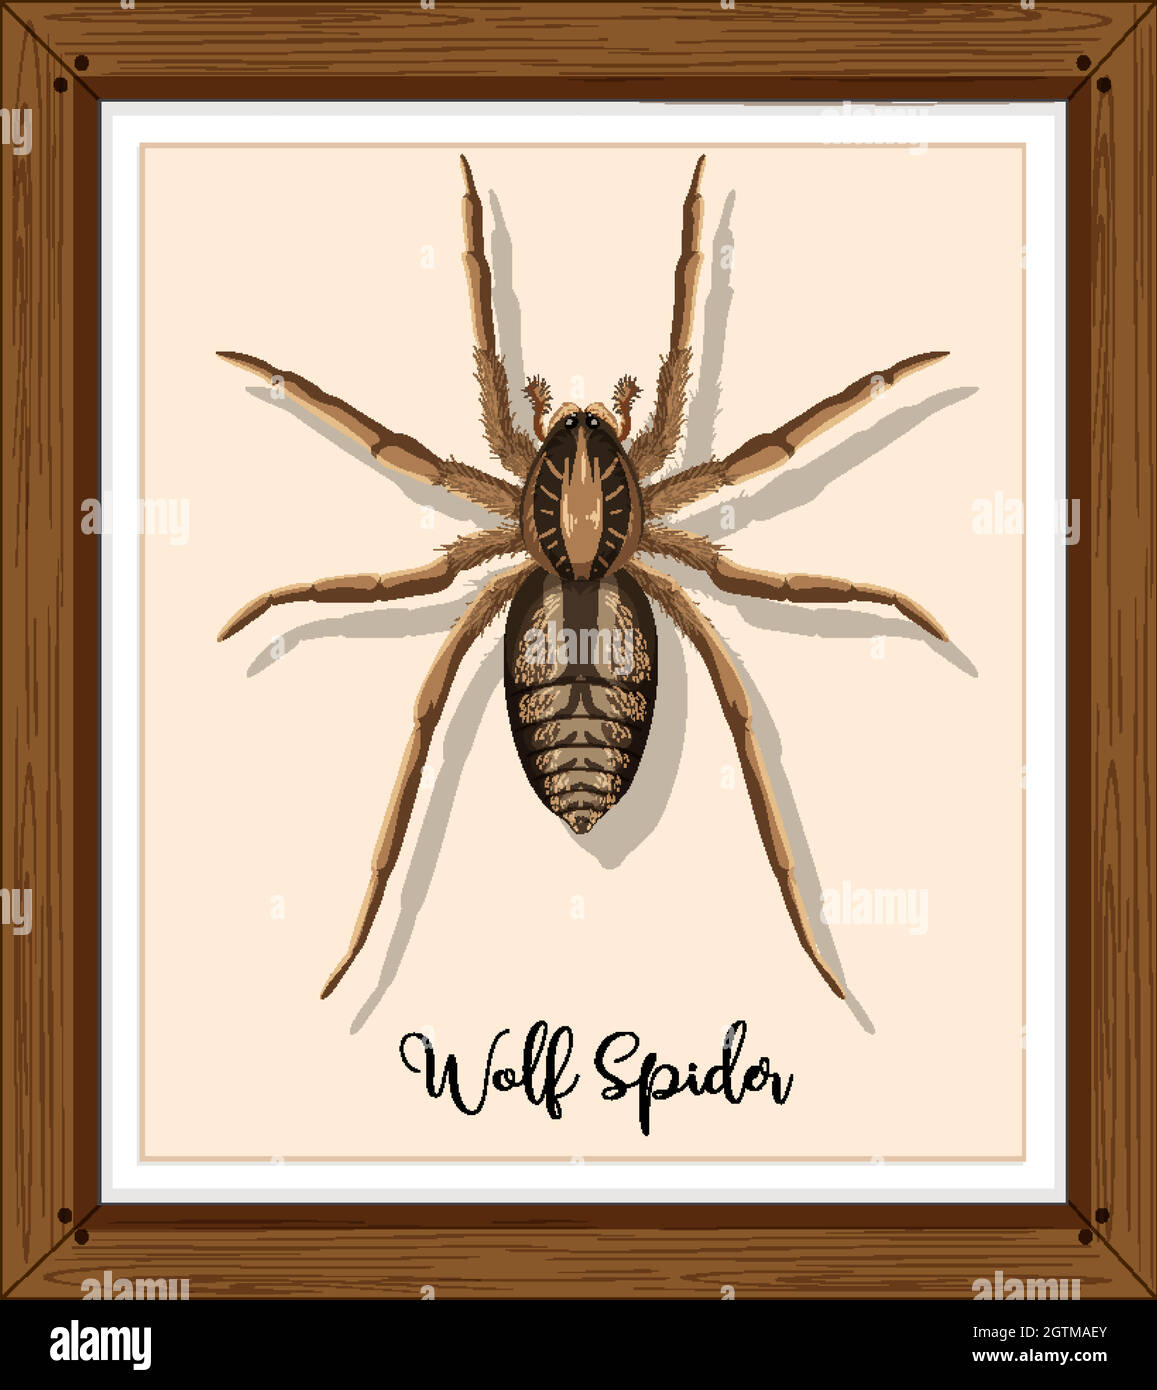 Wolf spider in wooden frame Stock Vector